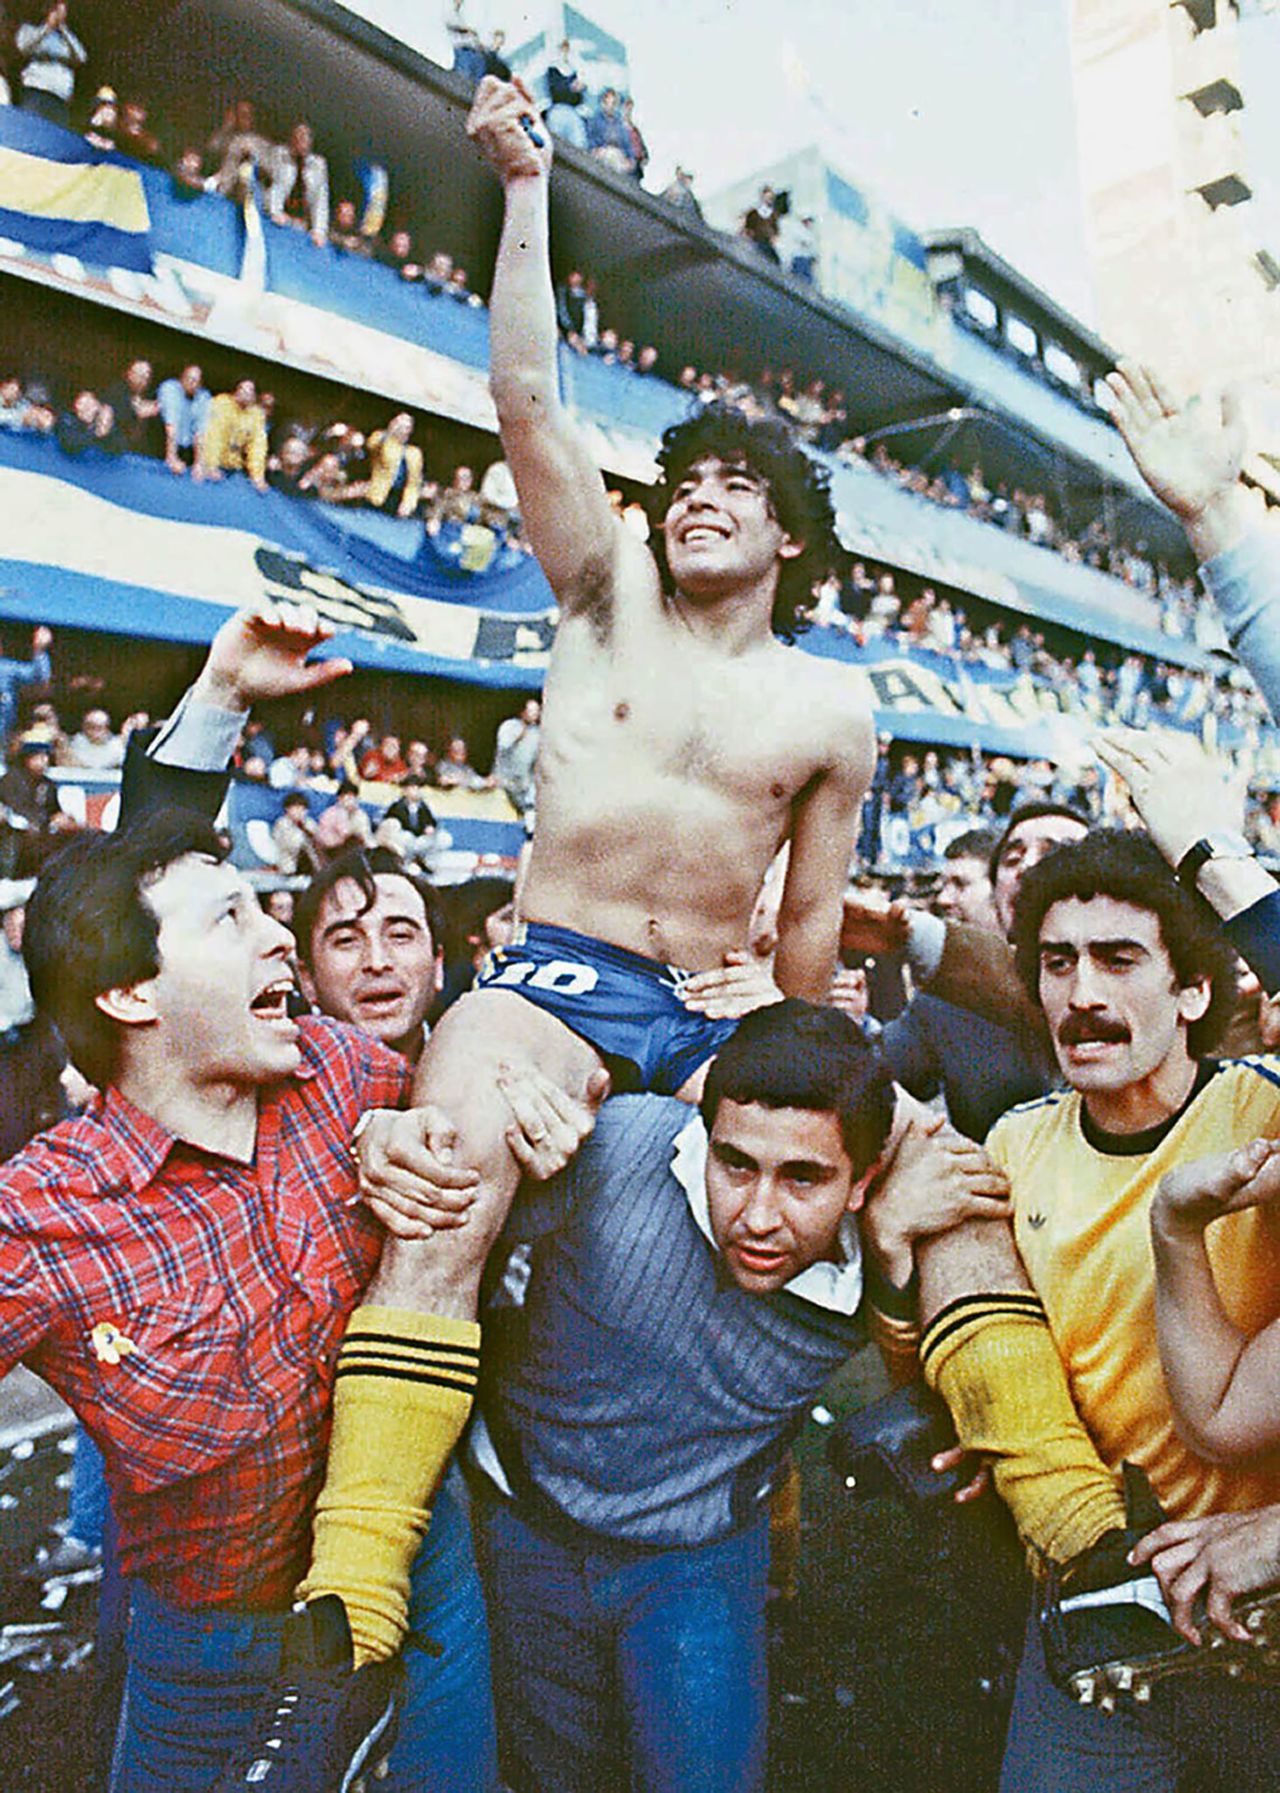 Maradona is carried by fans after leading Buenos Aires club Boca Juniors to a championship in 1981. The next year, Boca Juniors sold Maradona to Spanish club Barcelona for a world-record fee.